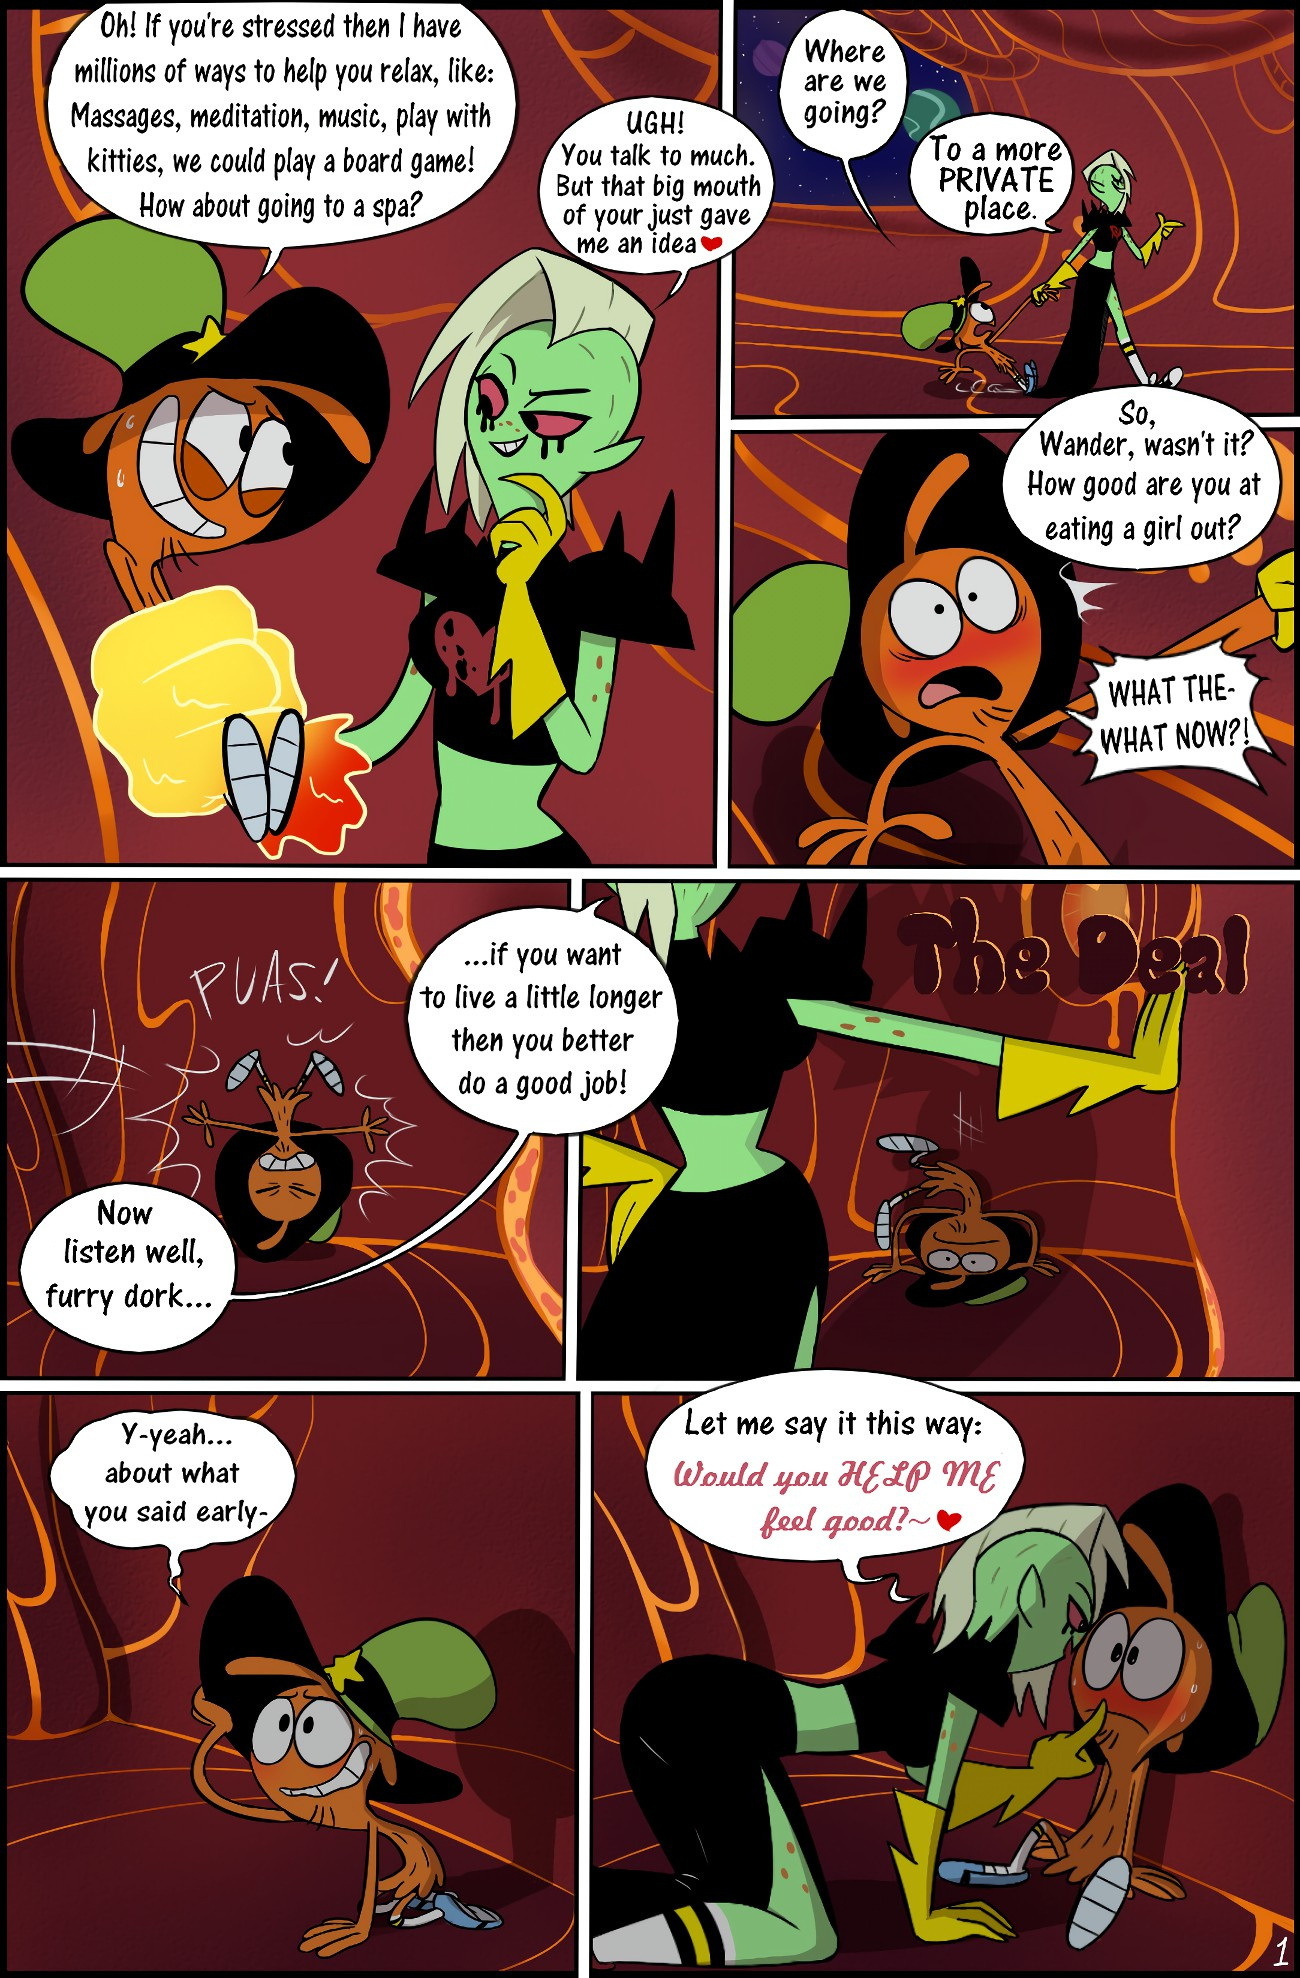 The Deal - Wander Over Yonder - Page 2